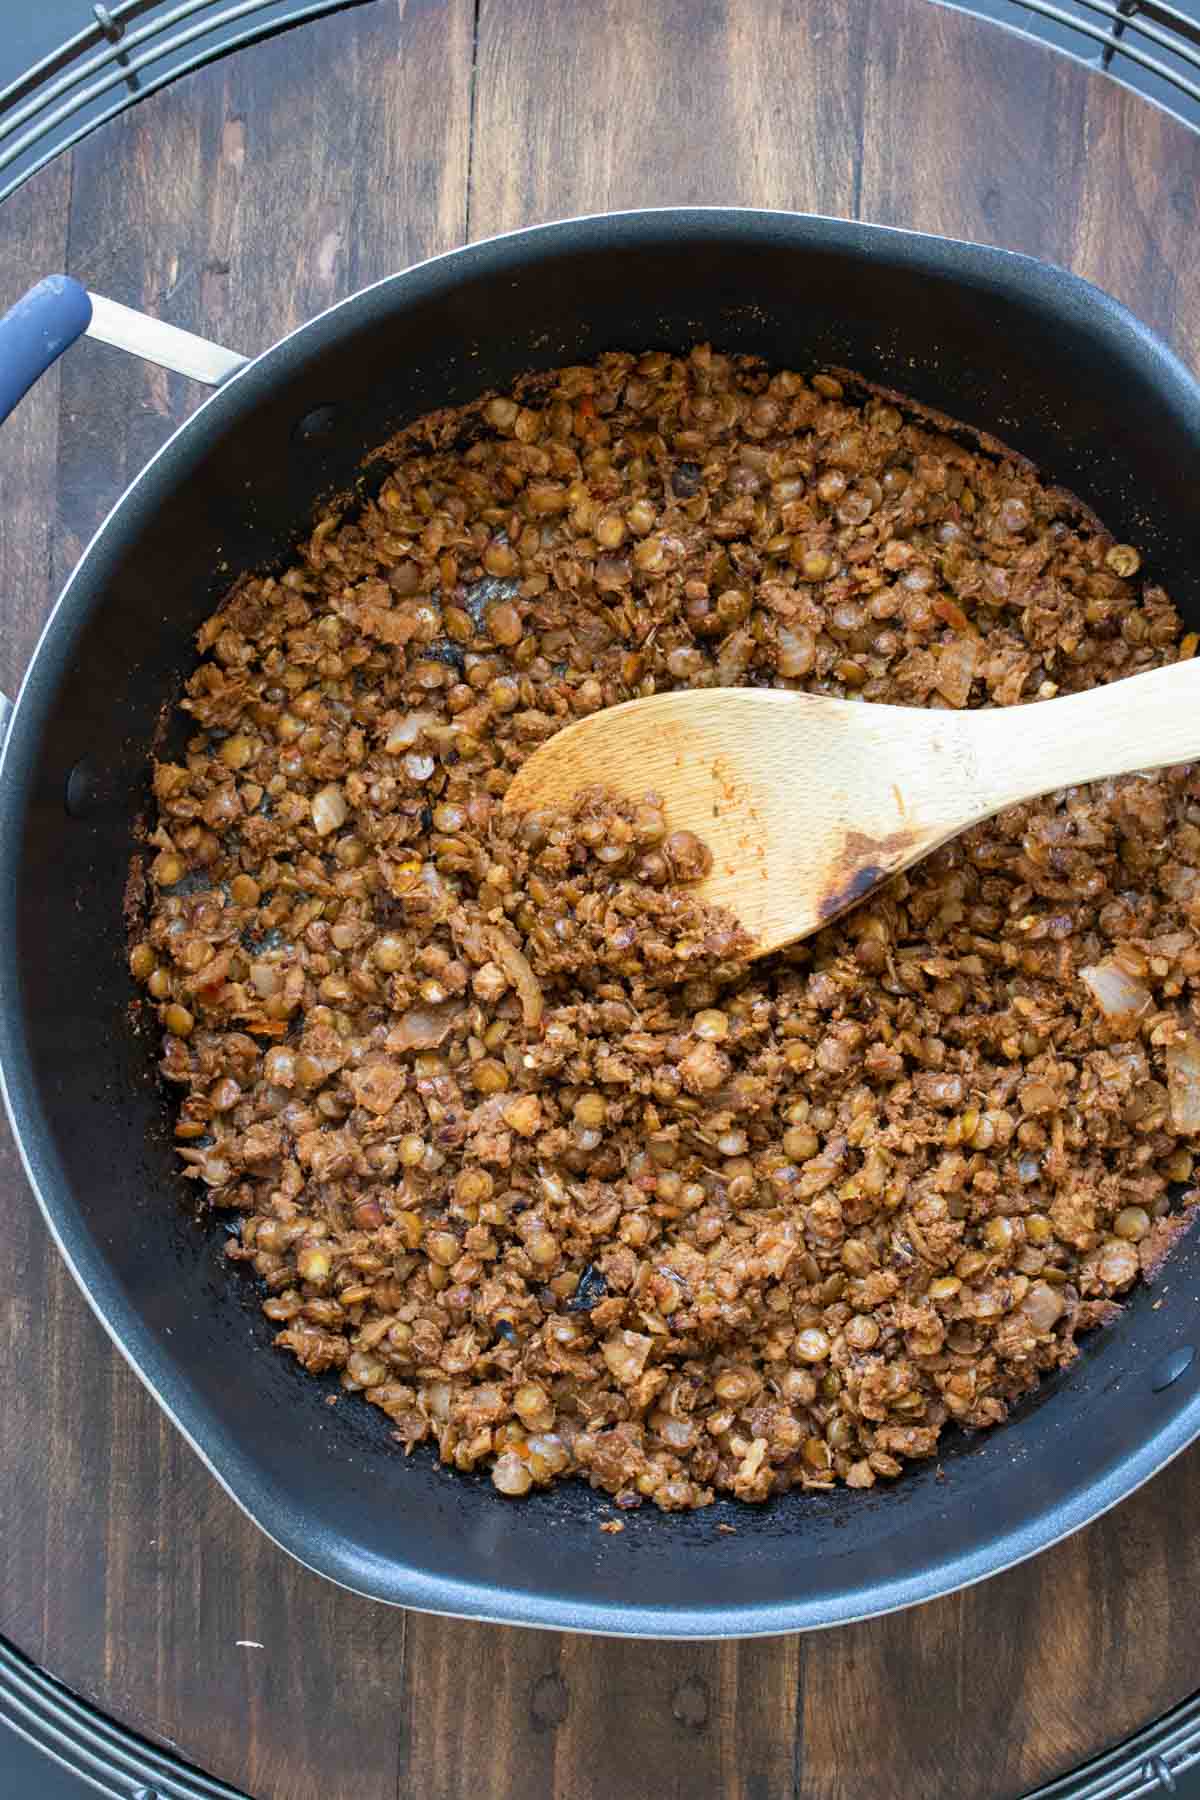 Cooked lentil and walnut being mixed around in a pan with a wooden spoon